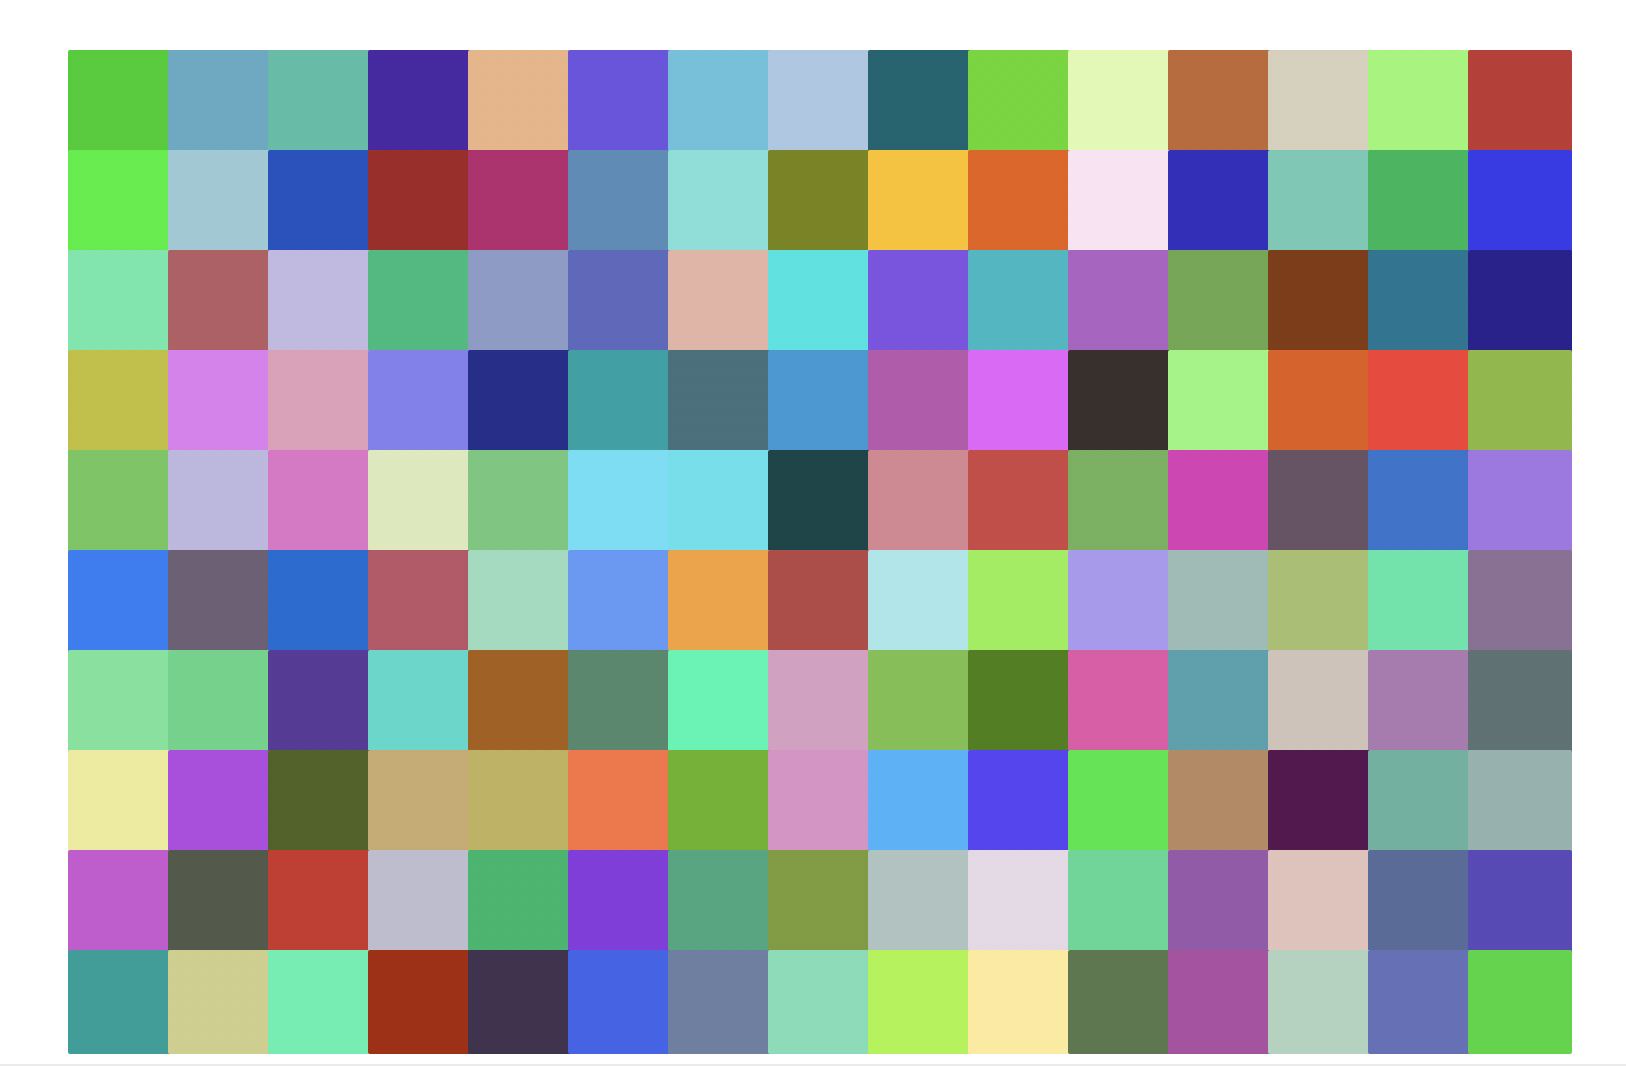 Another grid of squares, with 10 rows and 15 columns. This time, there are no outlines, and each square has a random color.